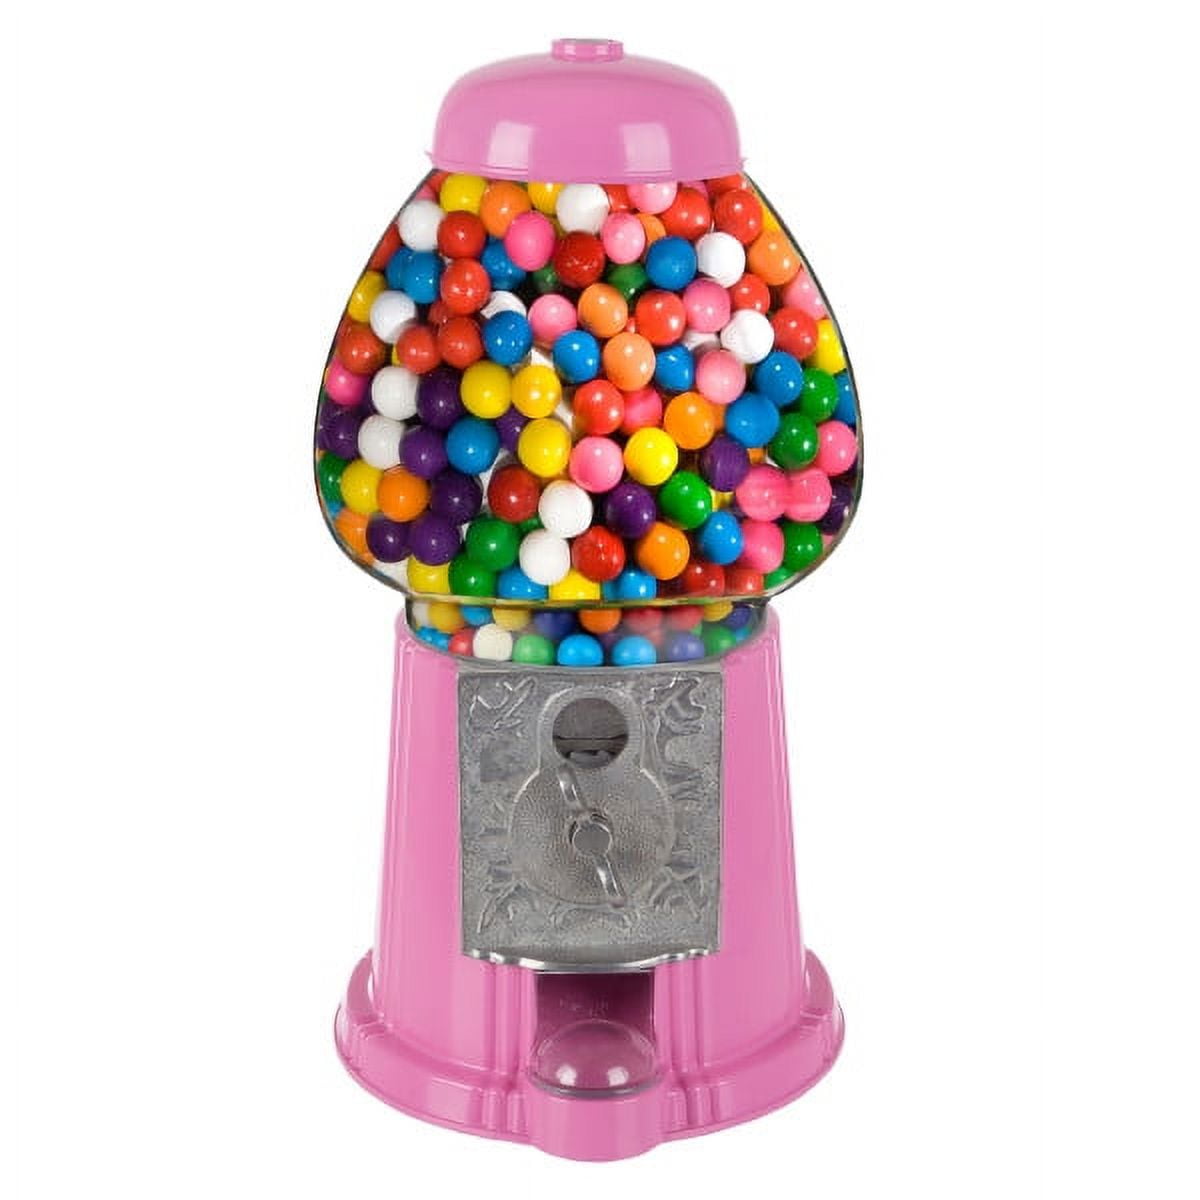 Make some candied nuts with me with this 2 in 1 machine that also make, Popcorn Machine